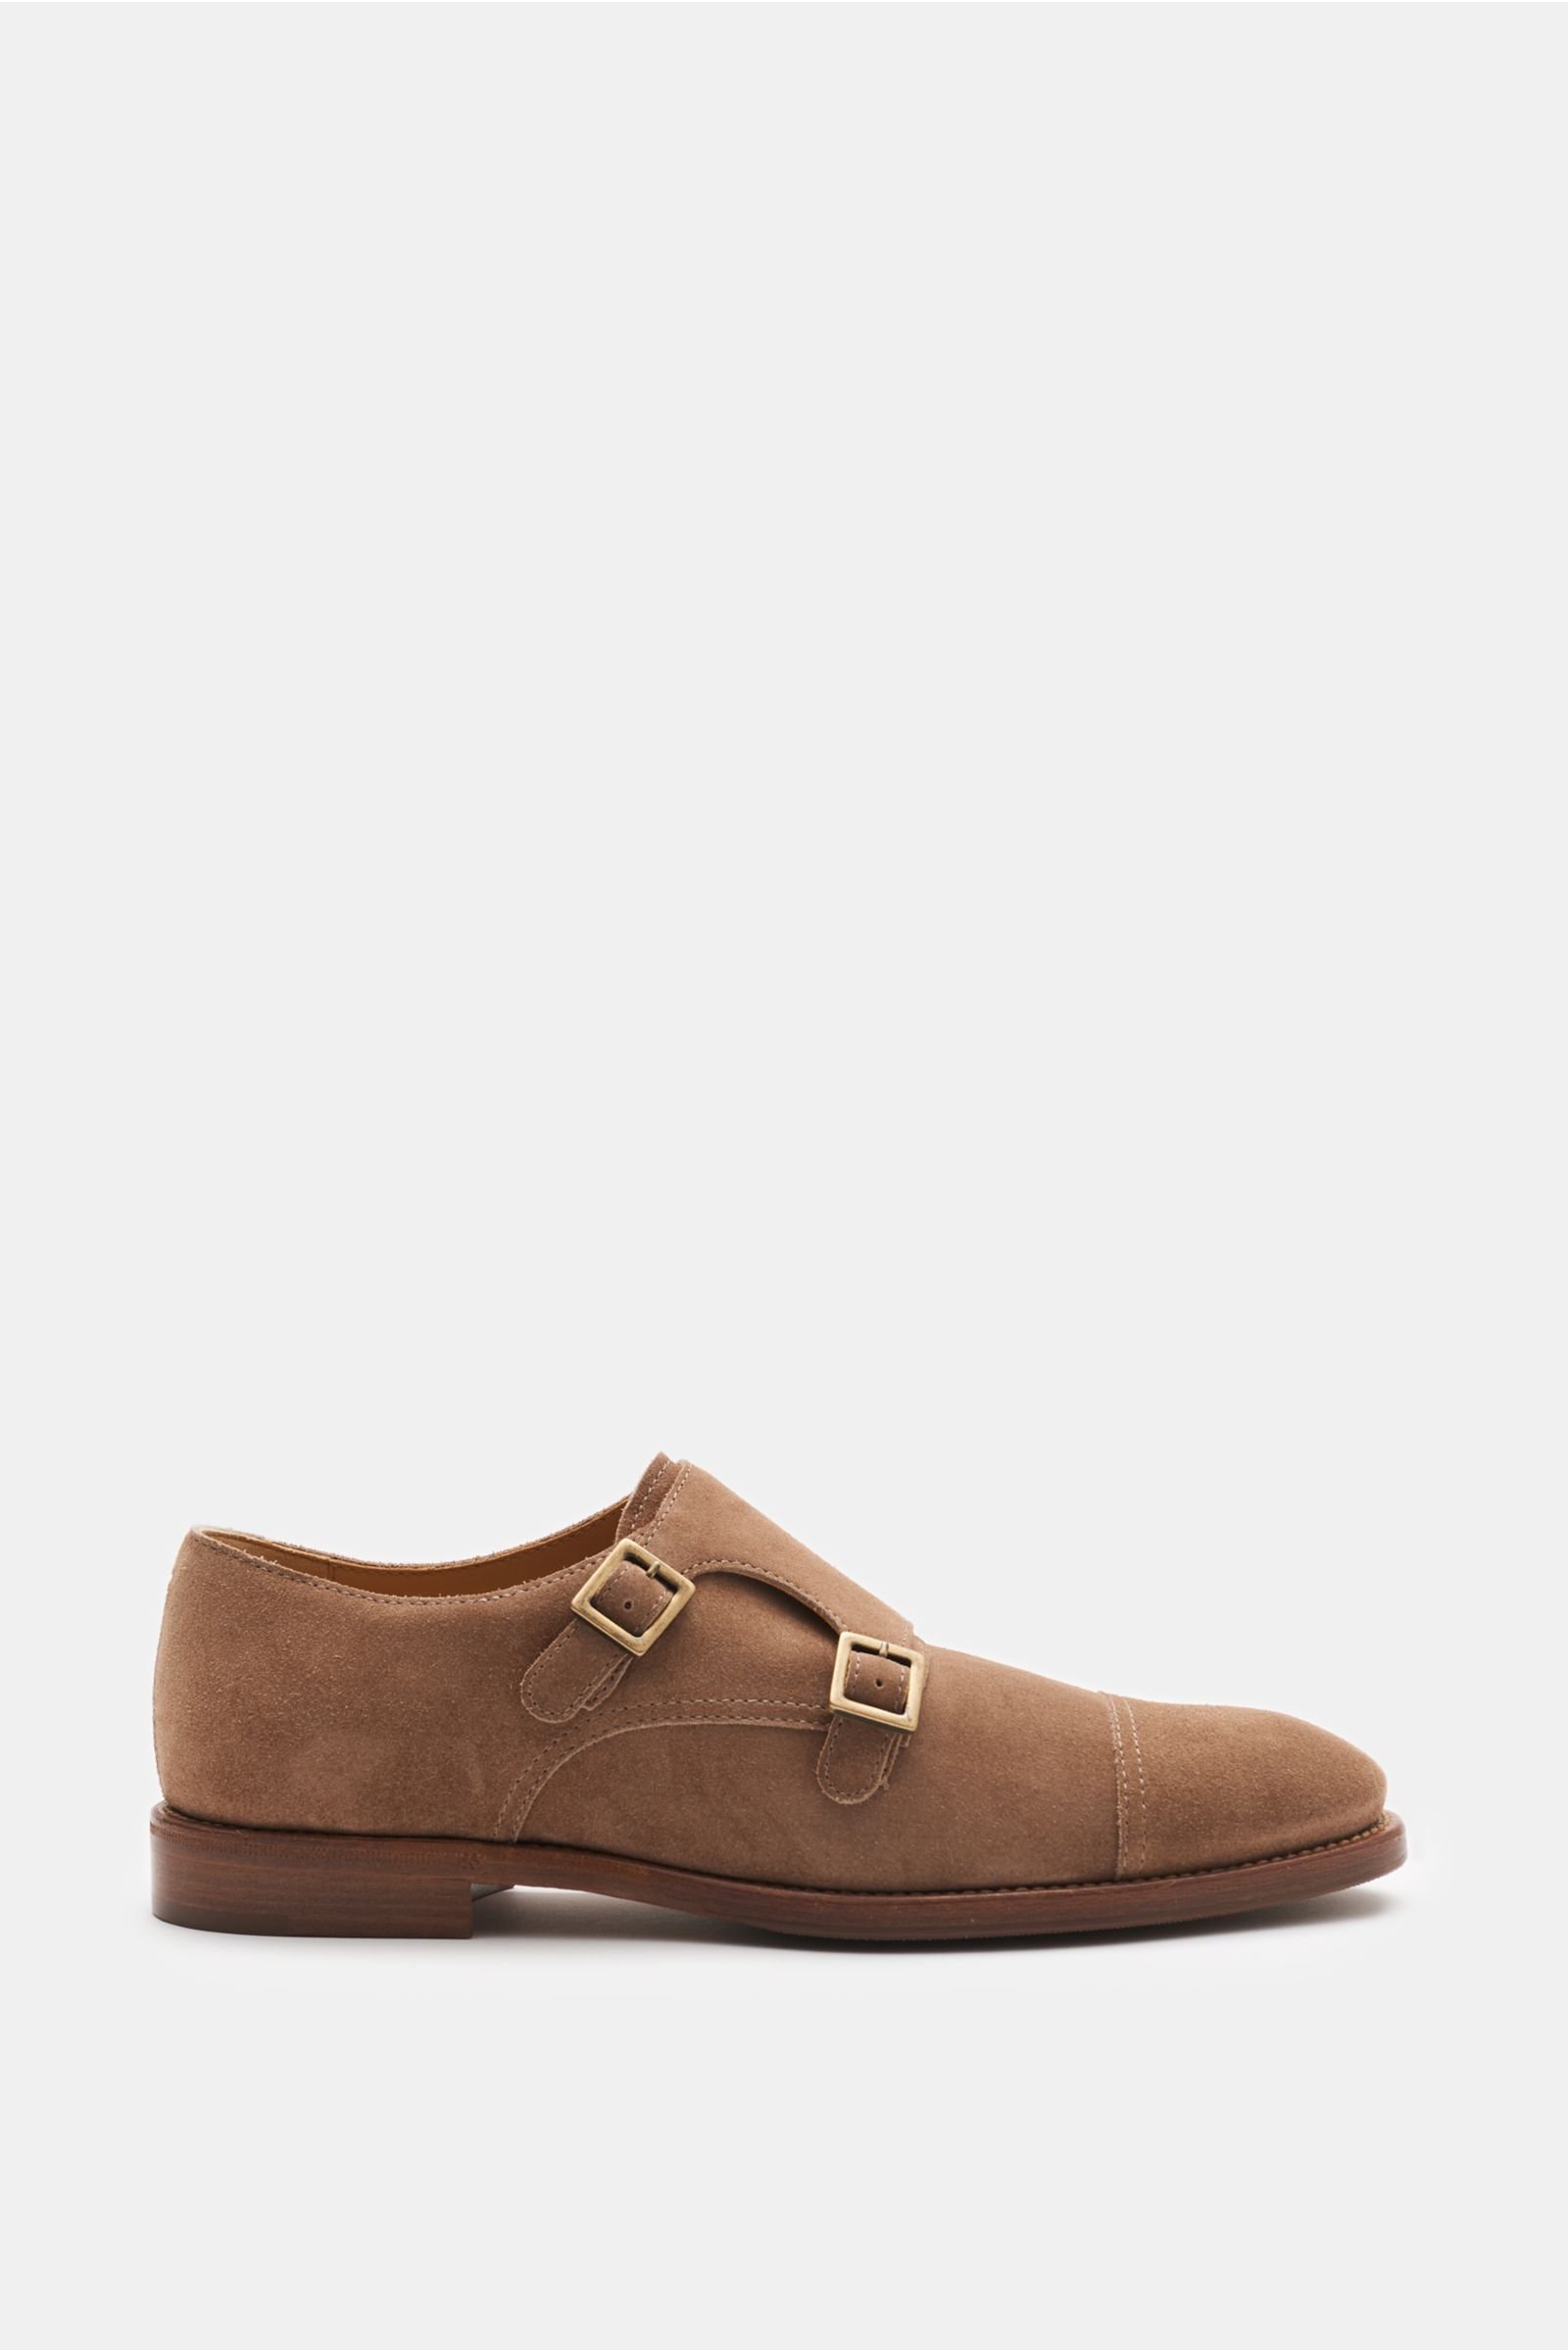 Double monk shoes light brown